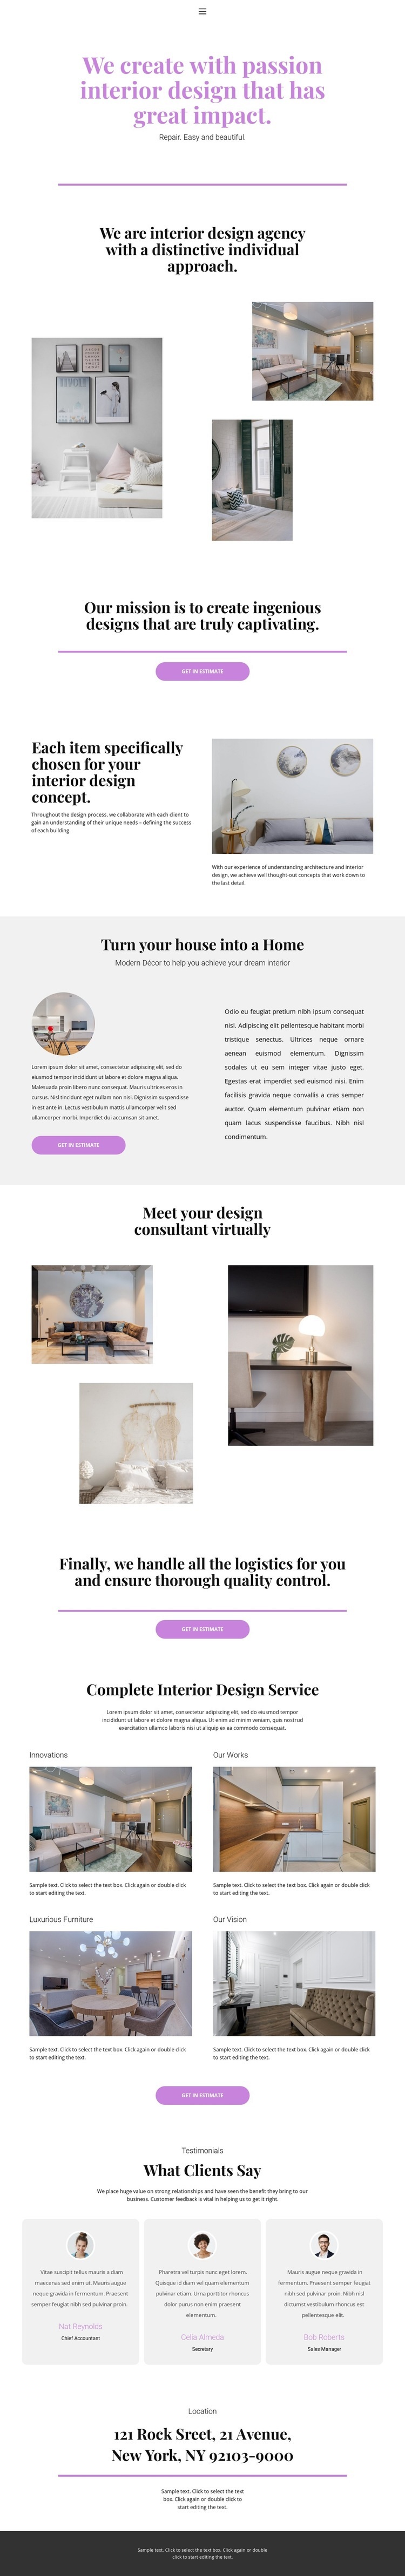 Choice of design for the house Web Page Design